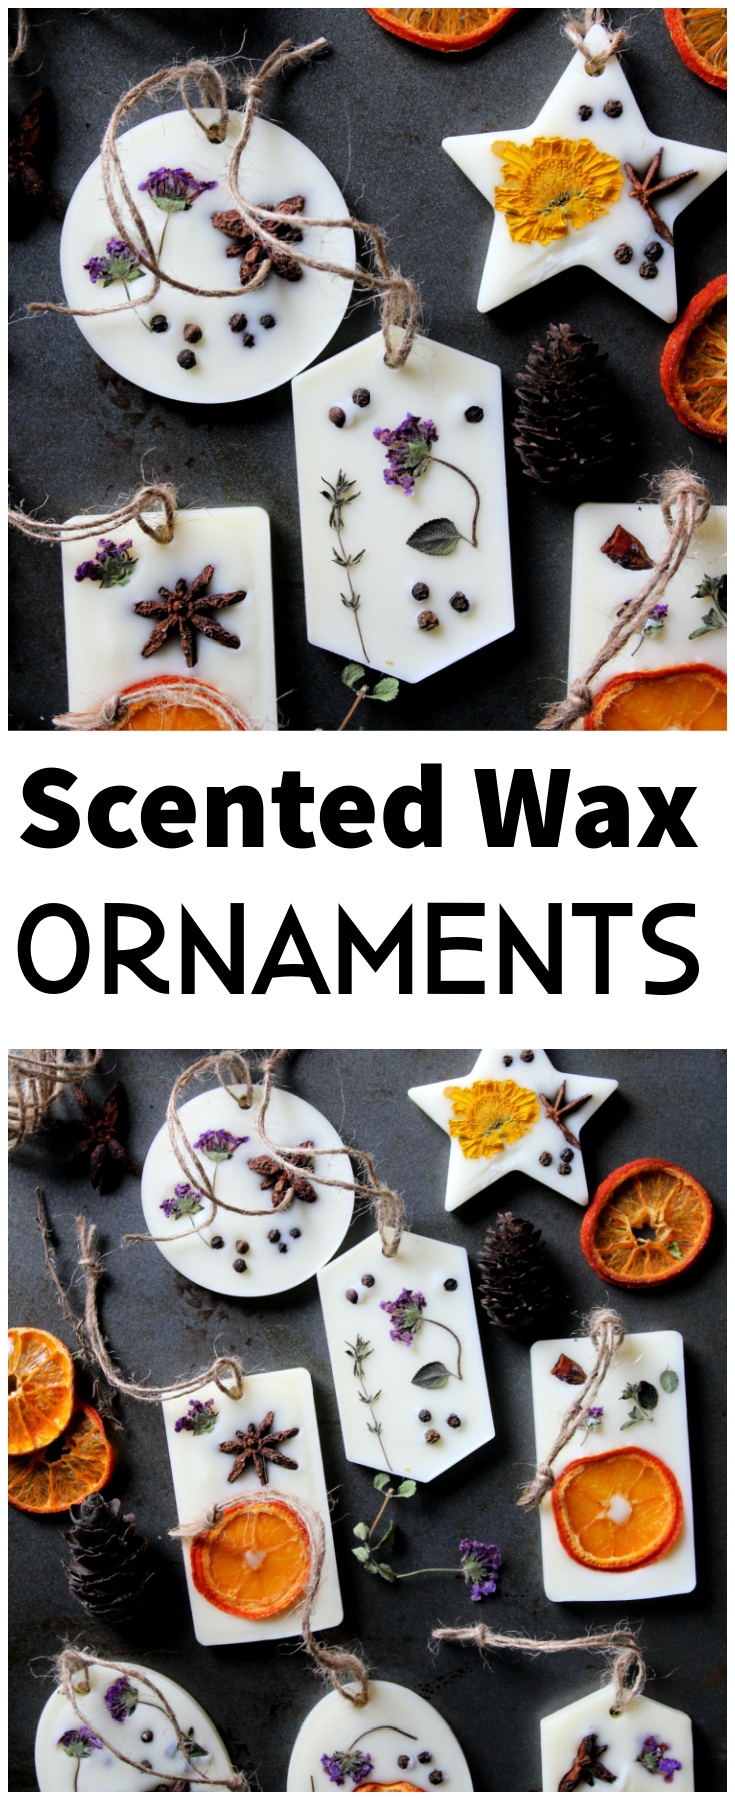 Scented Wax Ornaments